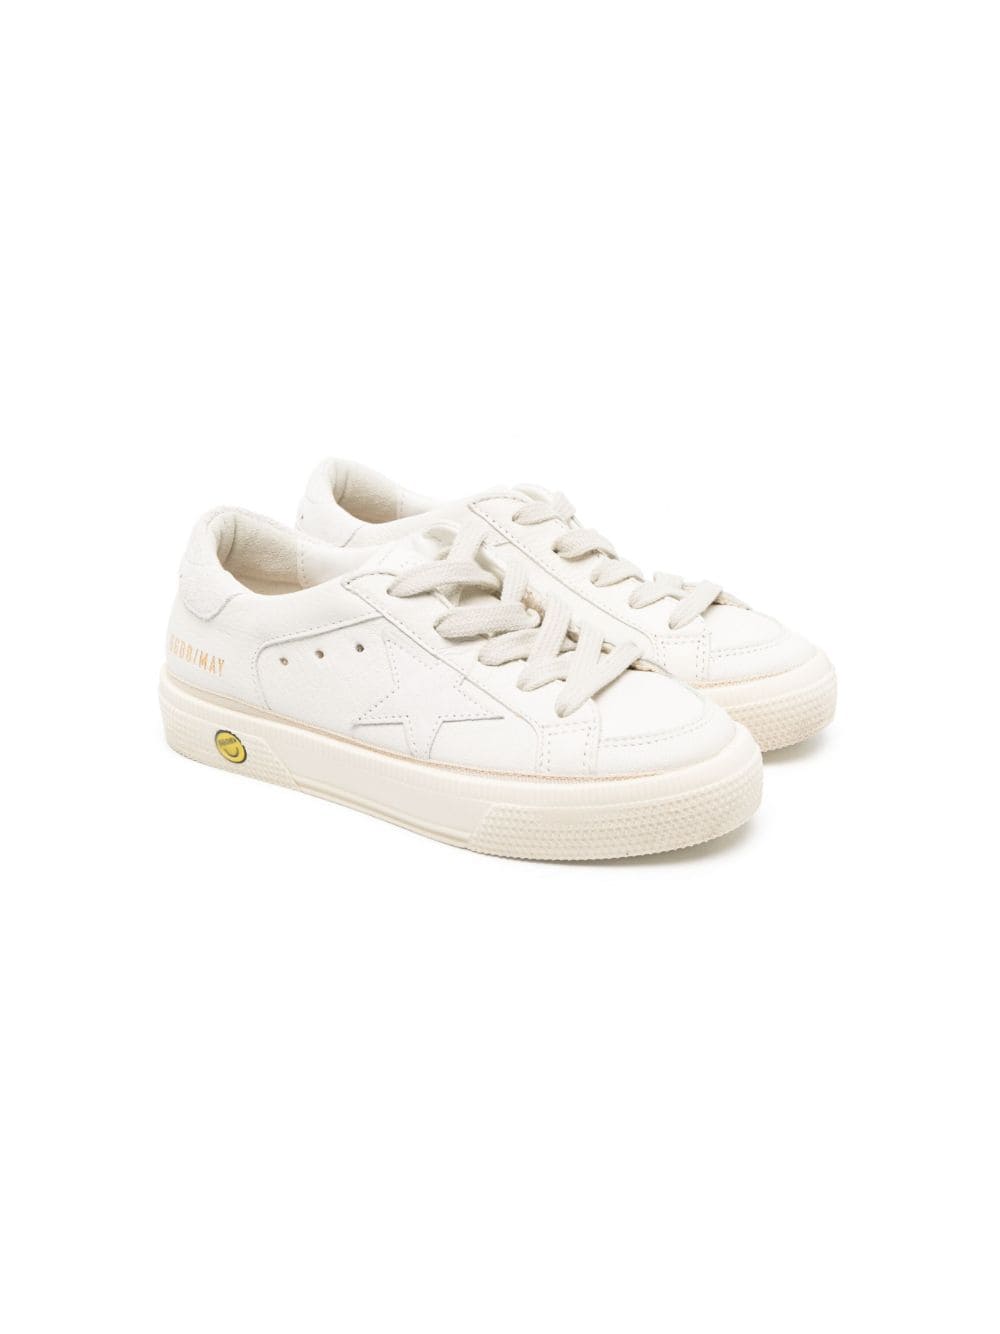 Golden Goose Kids' Sneakers May Nappa Upper In White